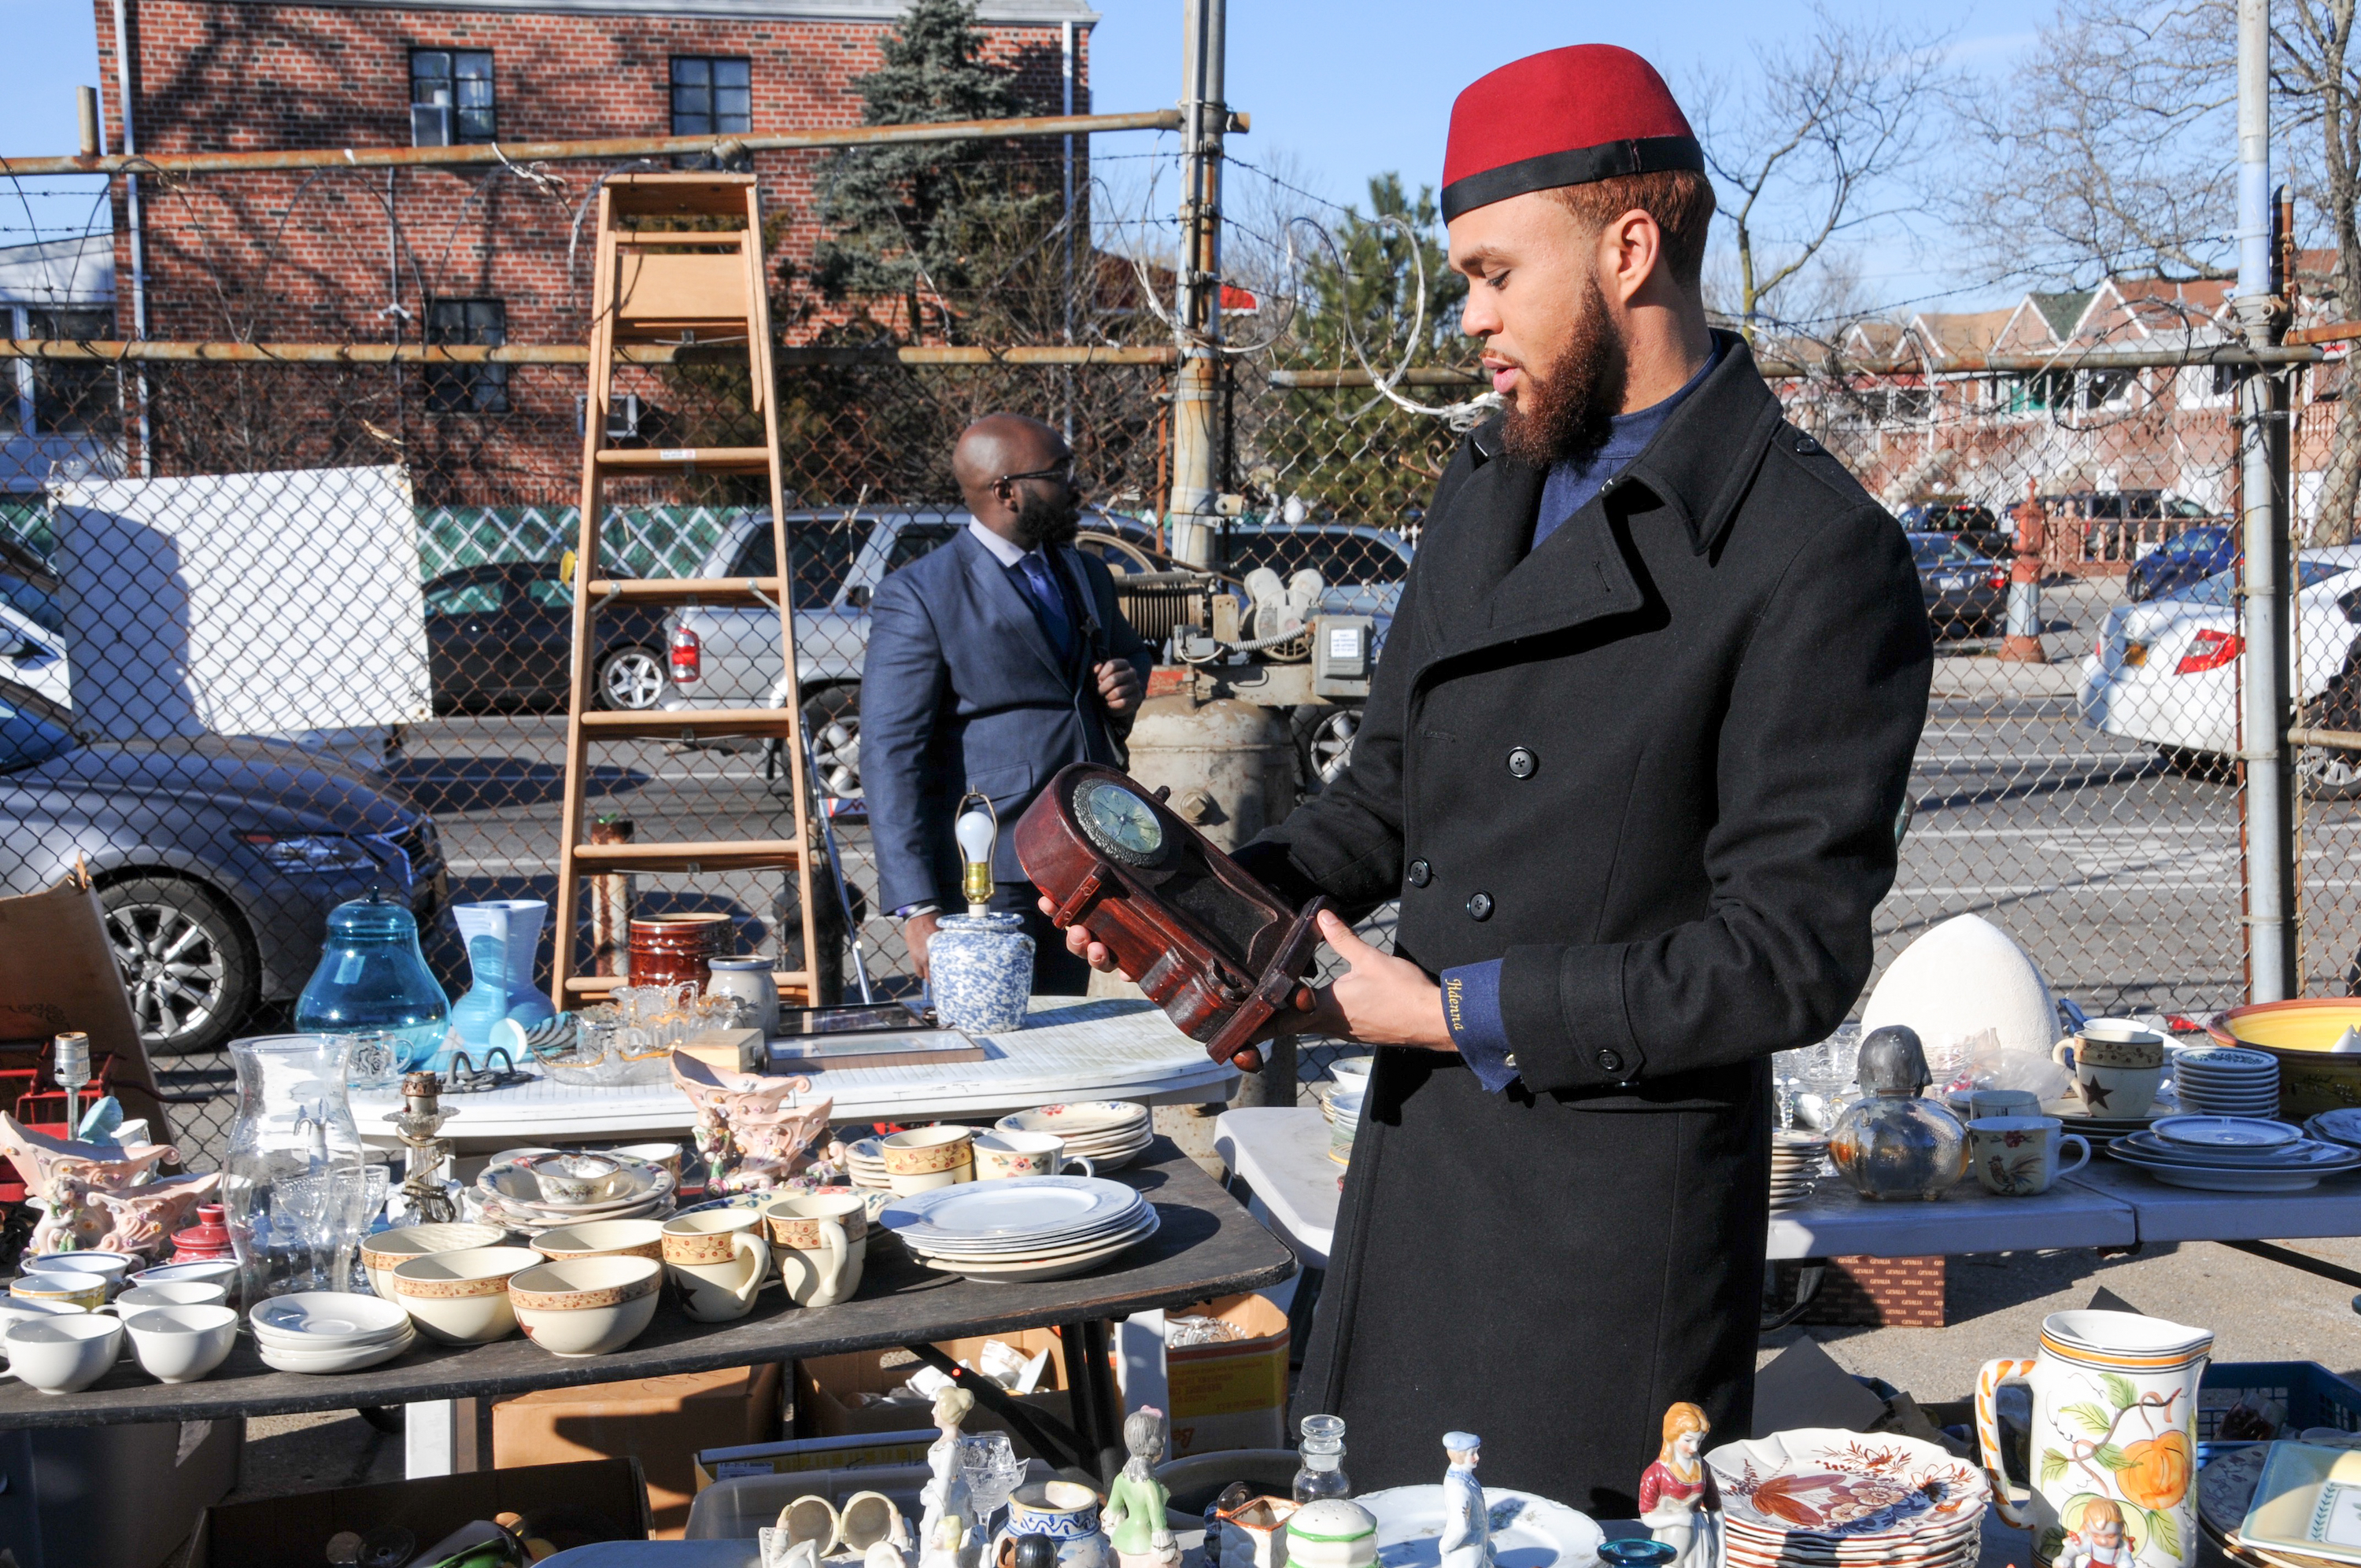 Jidenna Wants You to Know What Really Makes a Classic Man